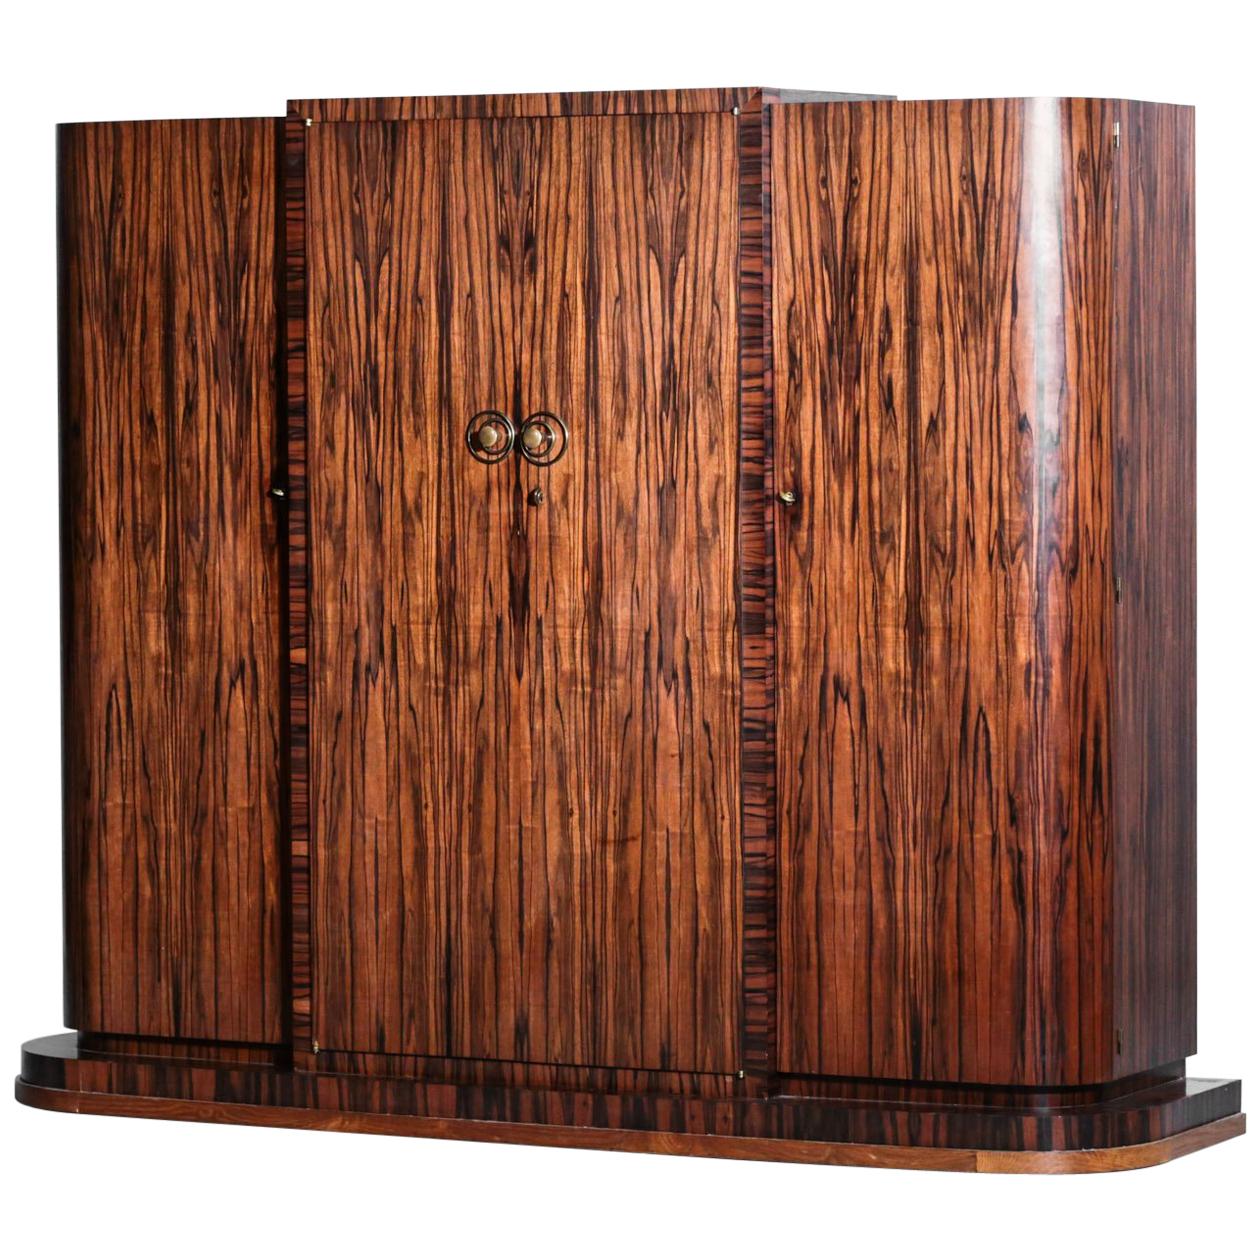 Large Art Deco Wardrobe from the 1930s French Ebony Macassar and Rosewood Rio